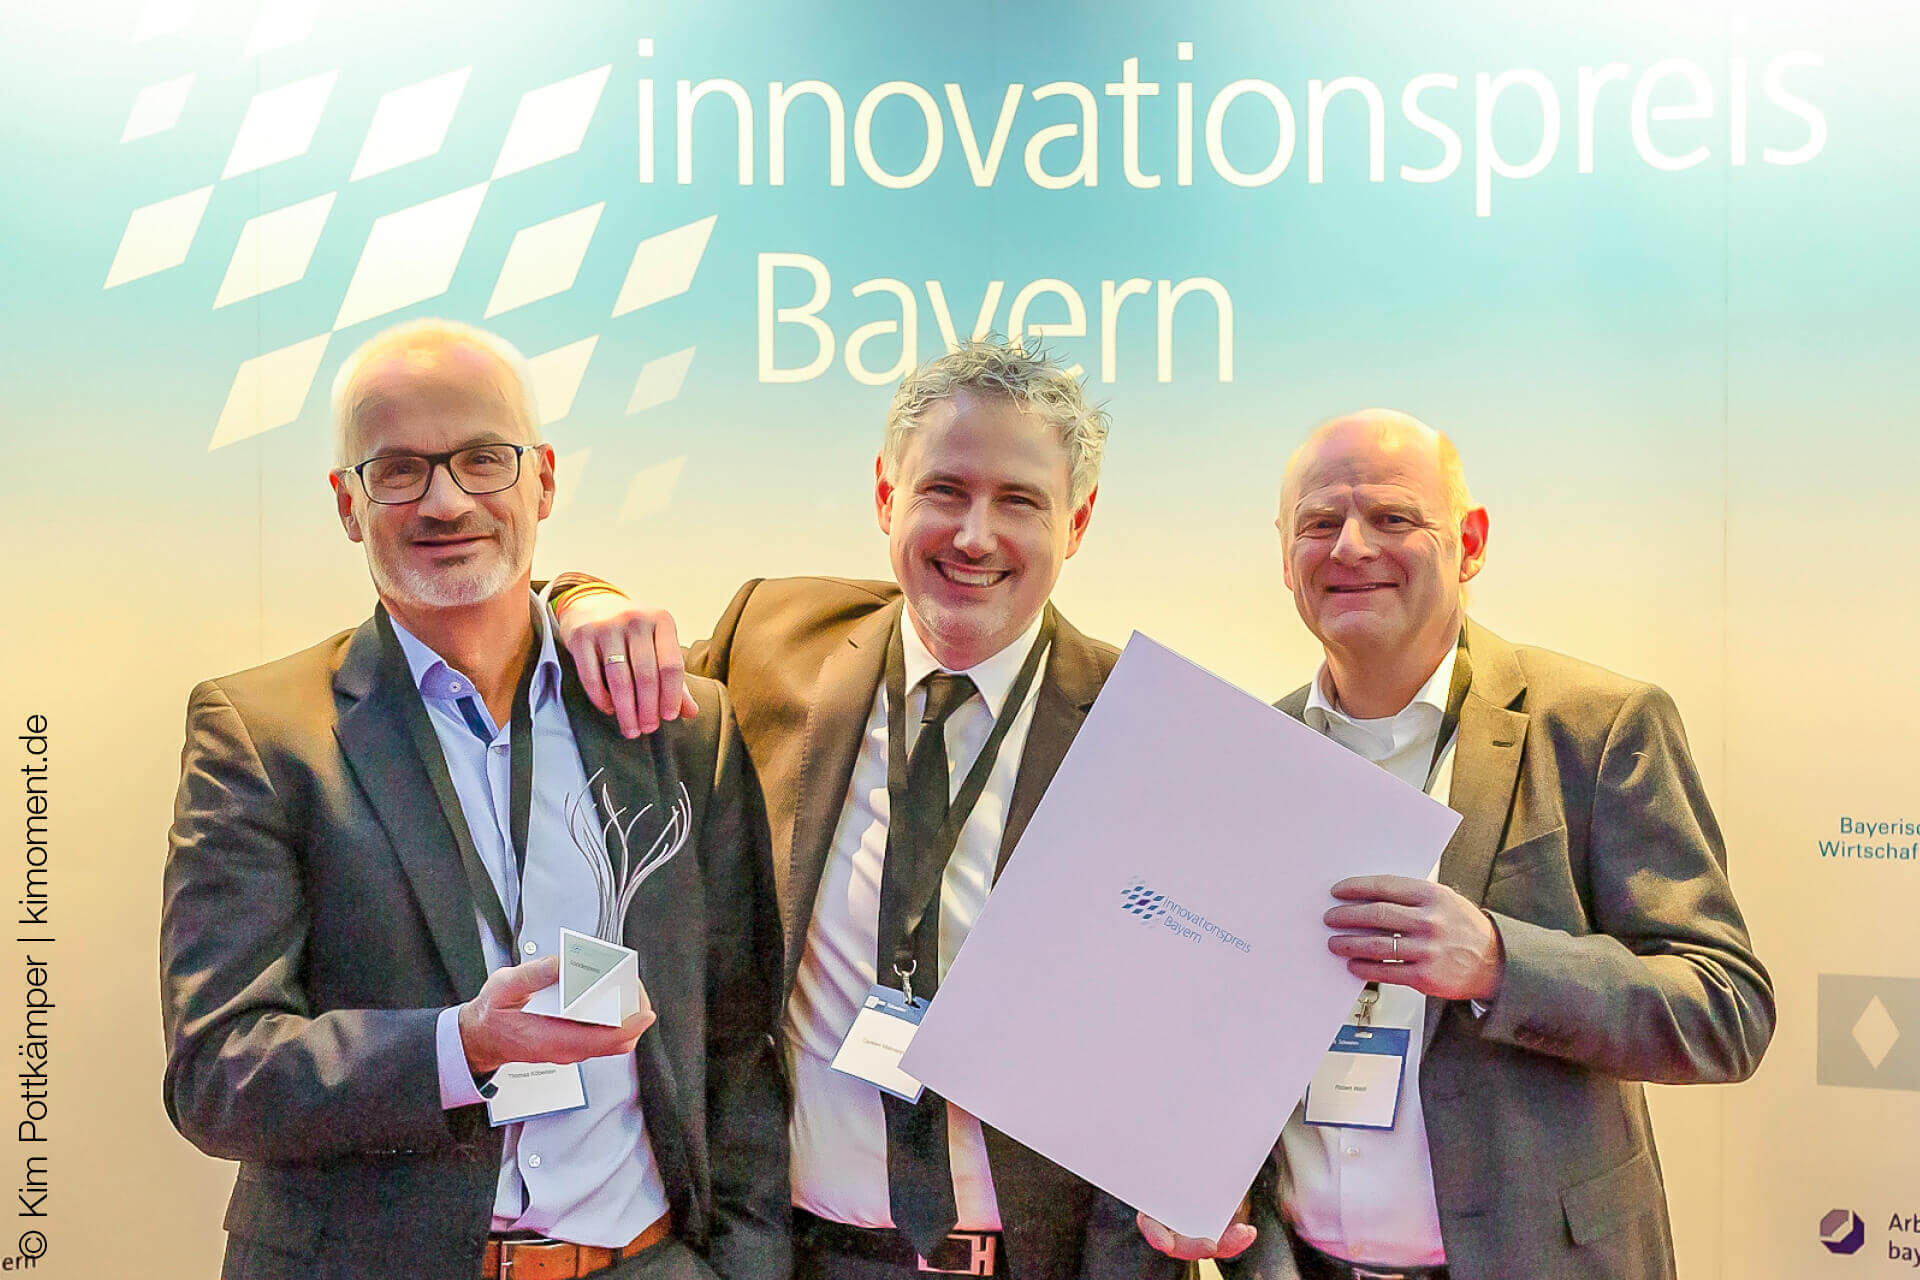 Jointly celebrating the Innovation Award Bavaria: Thomas Köberlein, President of Schreiner ProTech, Dr. Carsten Mahrenholz, CEO of Coldplasmatech, and Robert Weiß, Head of Technology and Innovation Management at Schreiner Group.